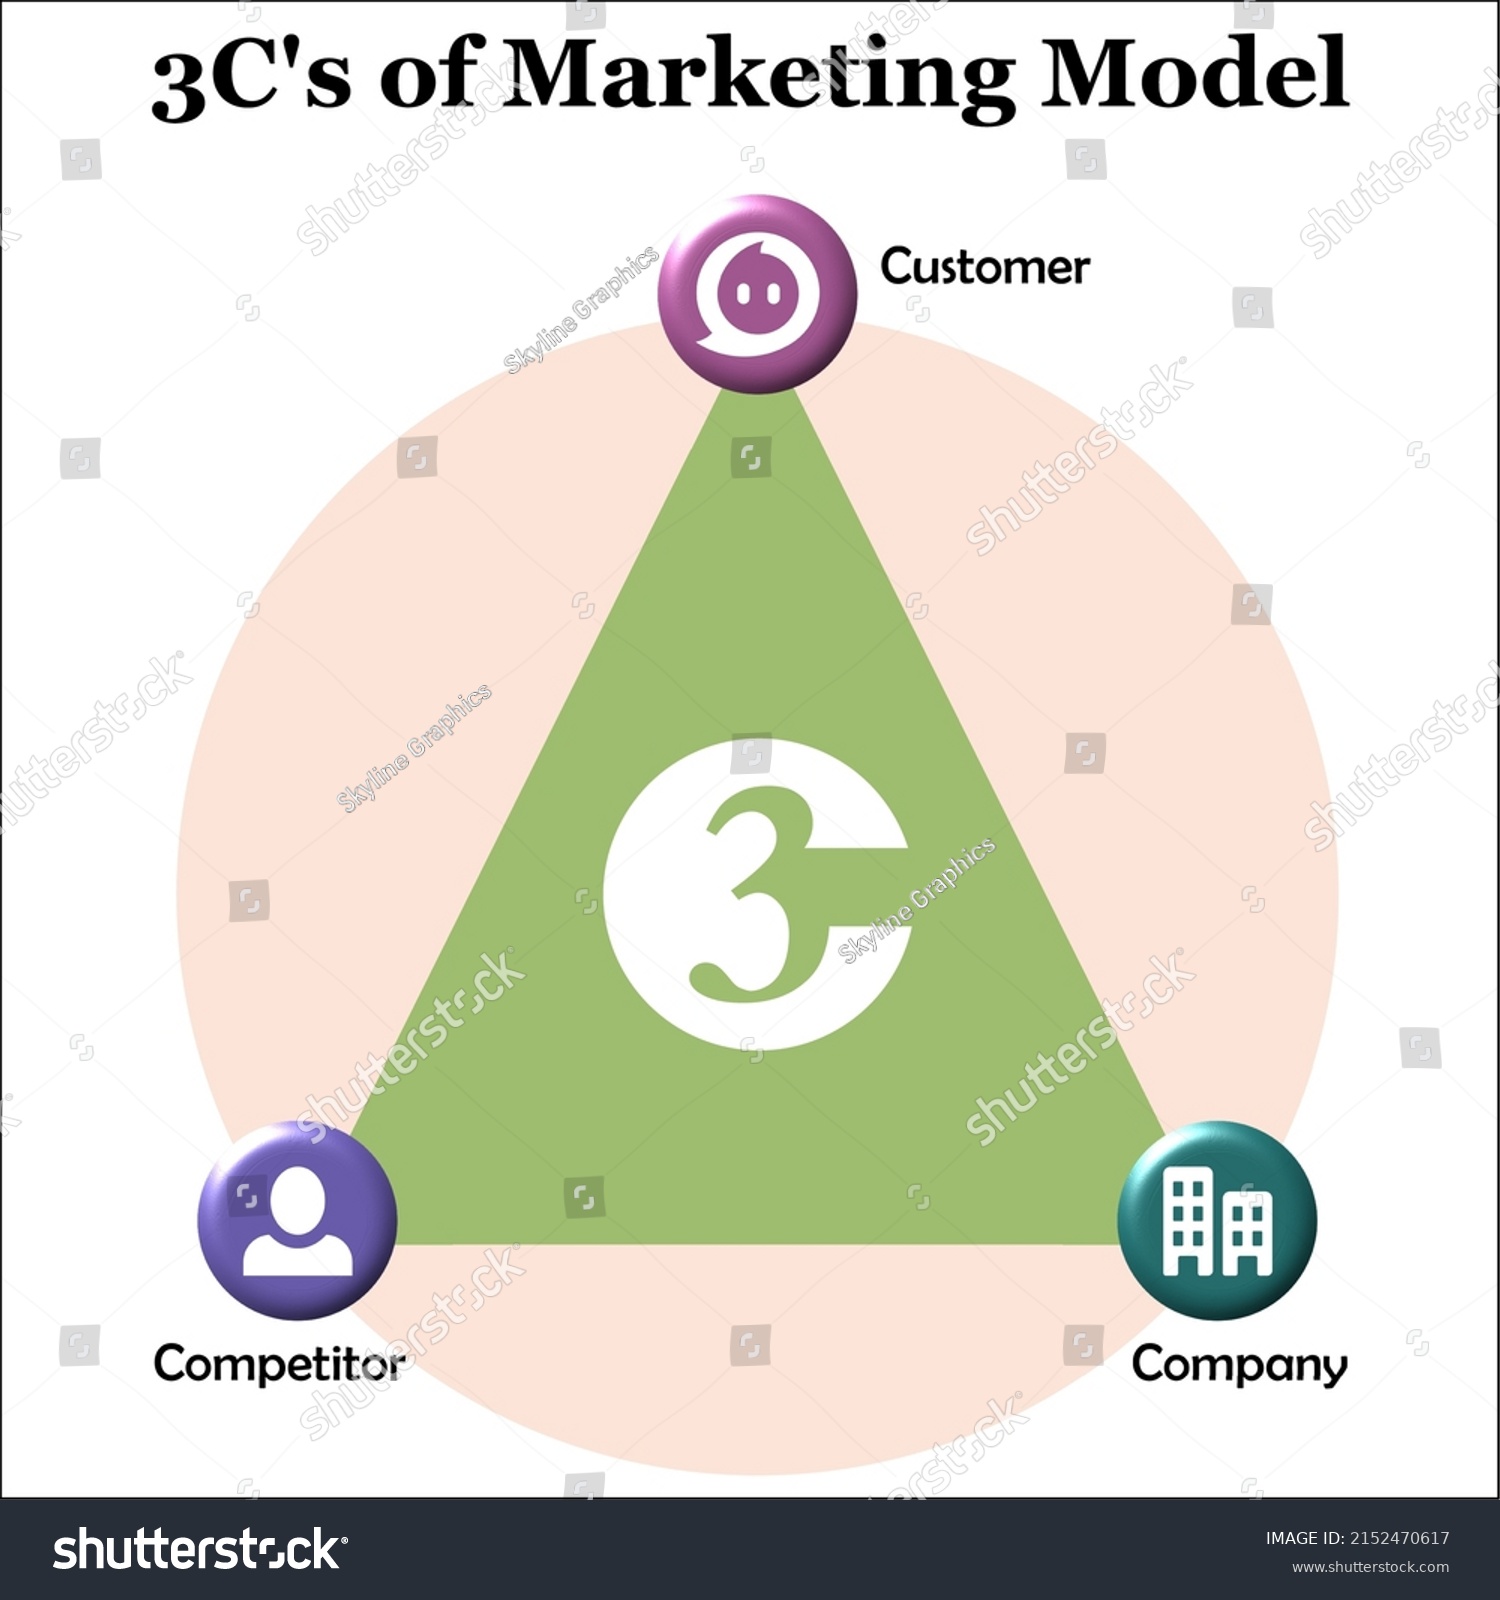 Ohmaes 3c Model For Marketing With Icons In An Royalty Free Stock Vector 2152470617 1510